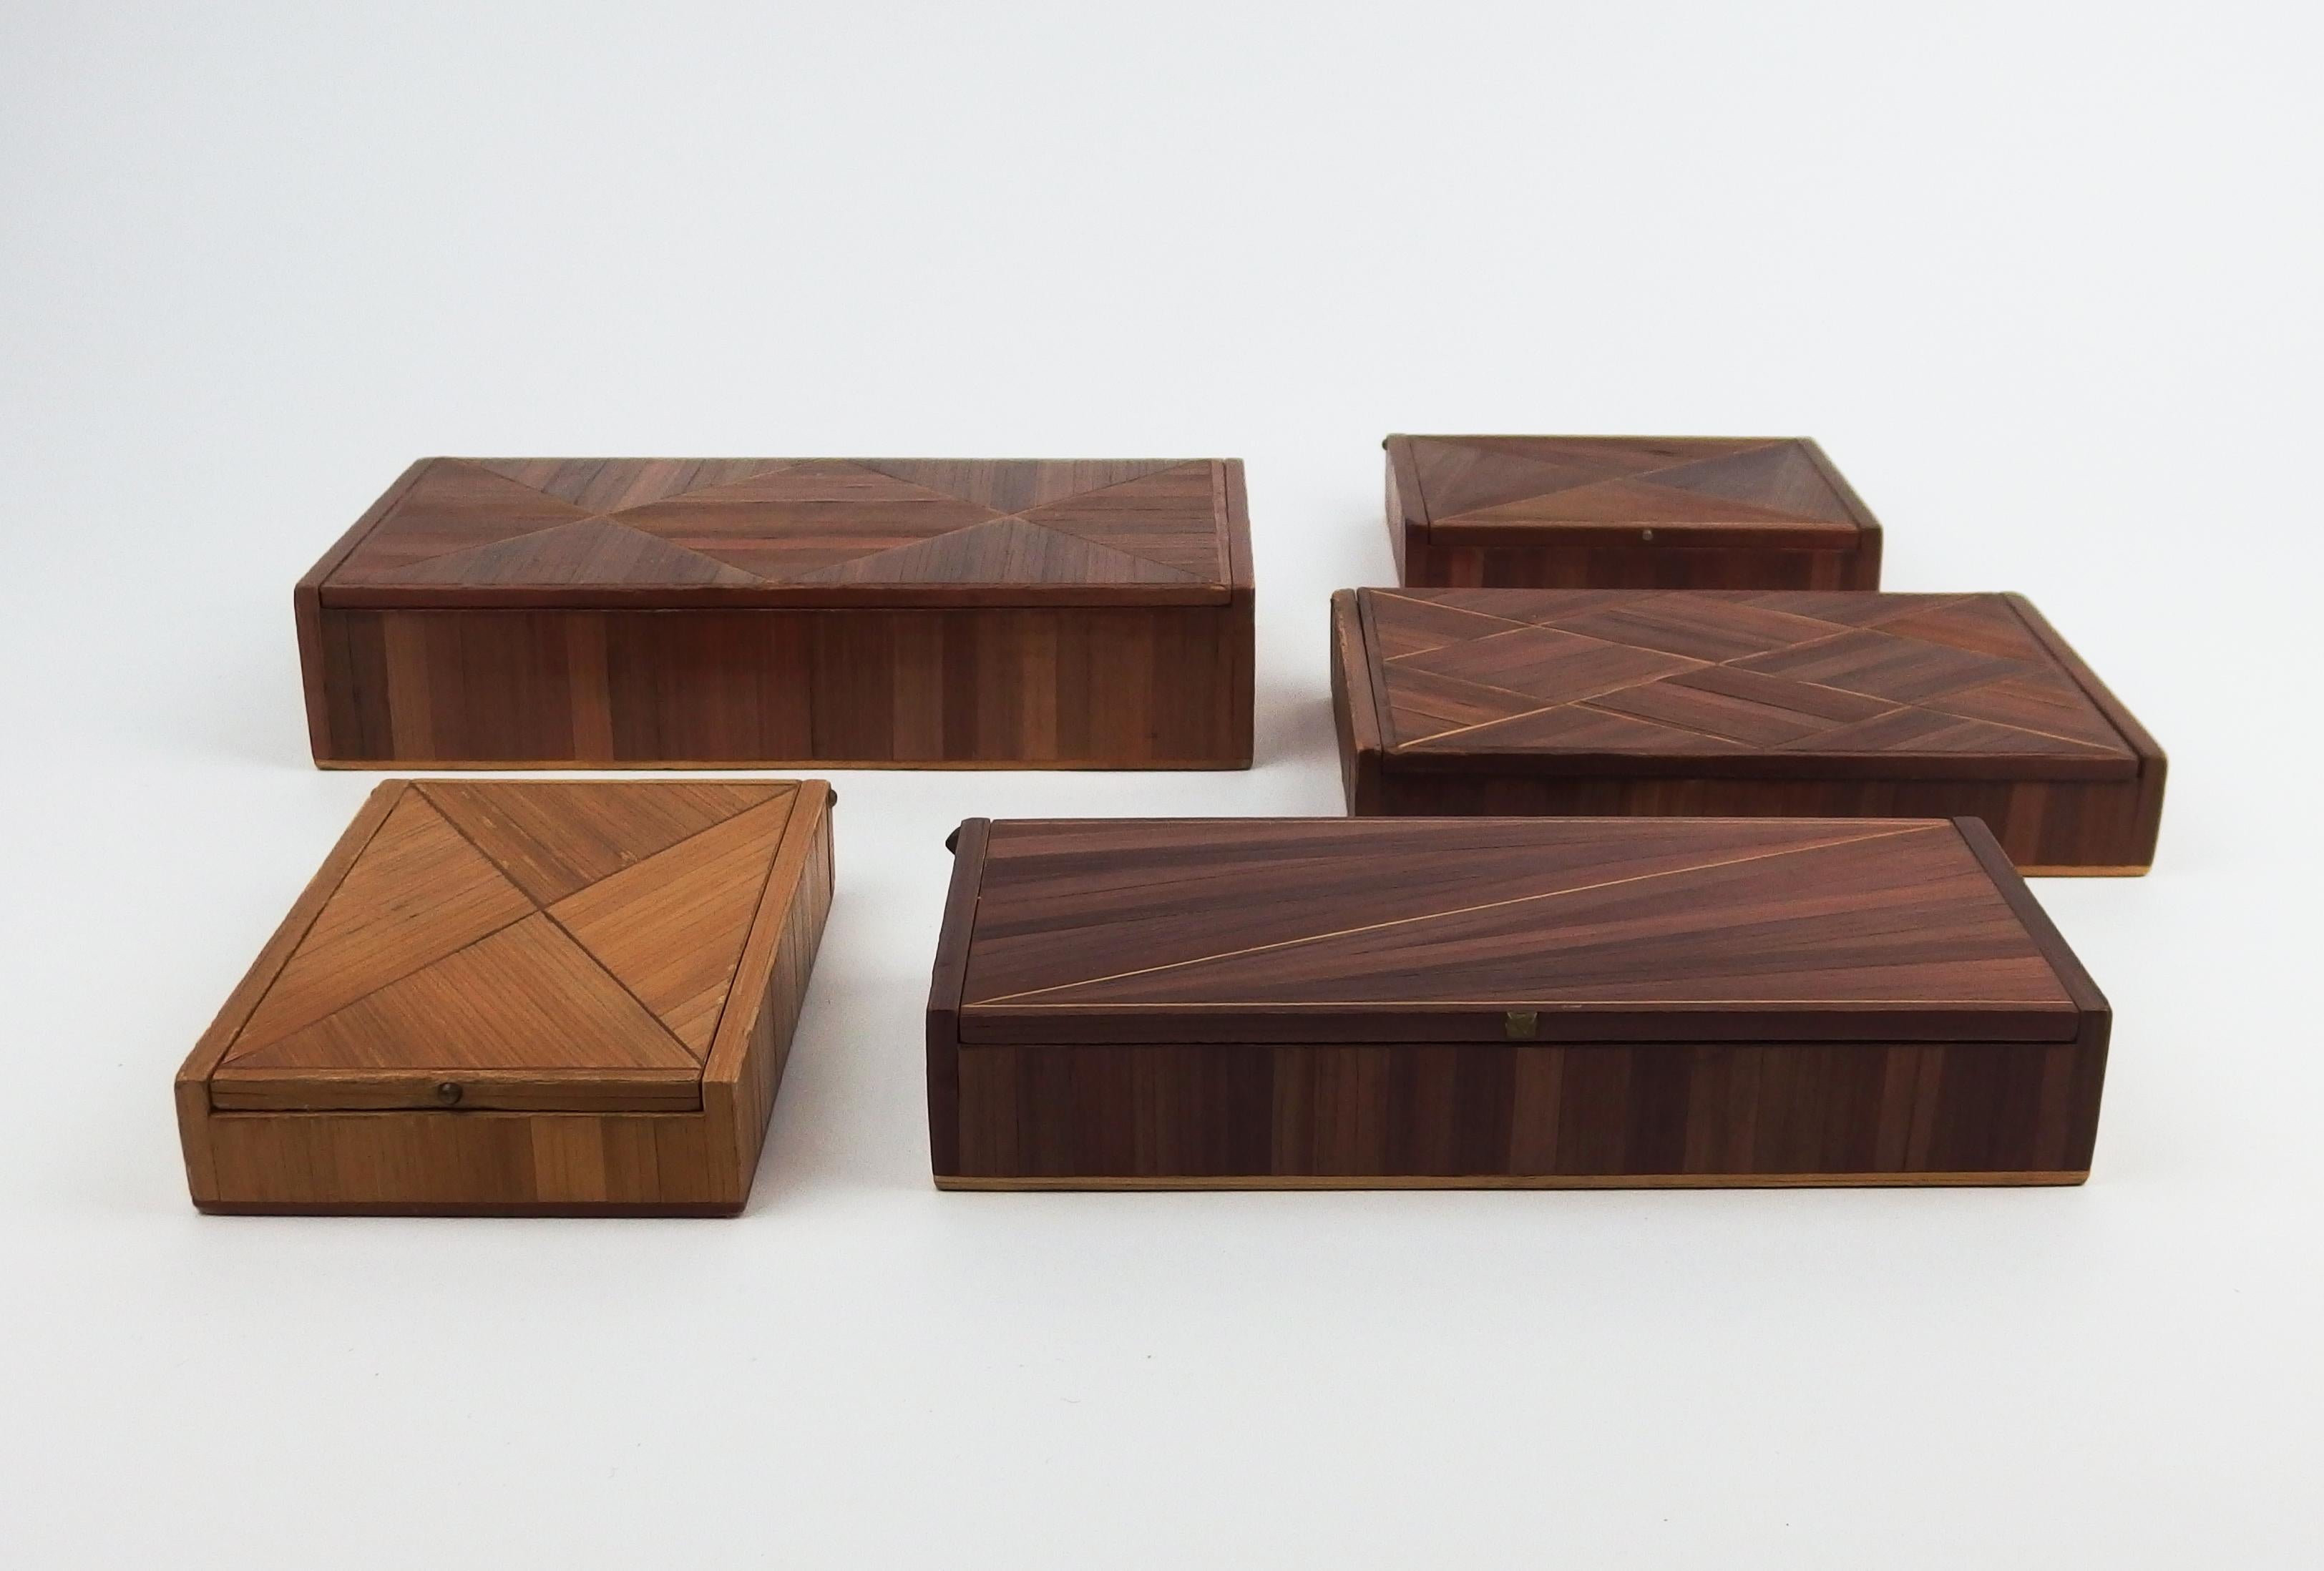 Collection of five Art Deco straw marquetry boxes with different finshings: wood or cork veneer inside, straw marquetry or leather imitation cardboard on the bottom. These type of boxes is often attributed to Jean-Michel Frank.
Small boxes